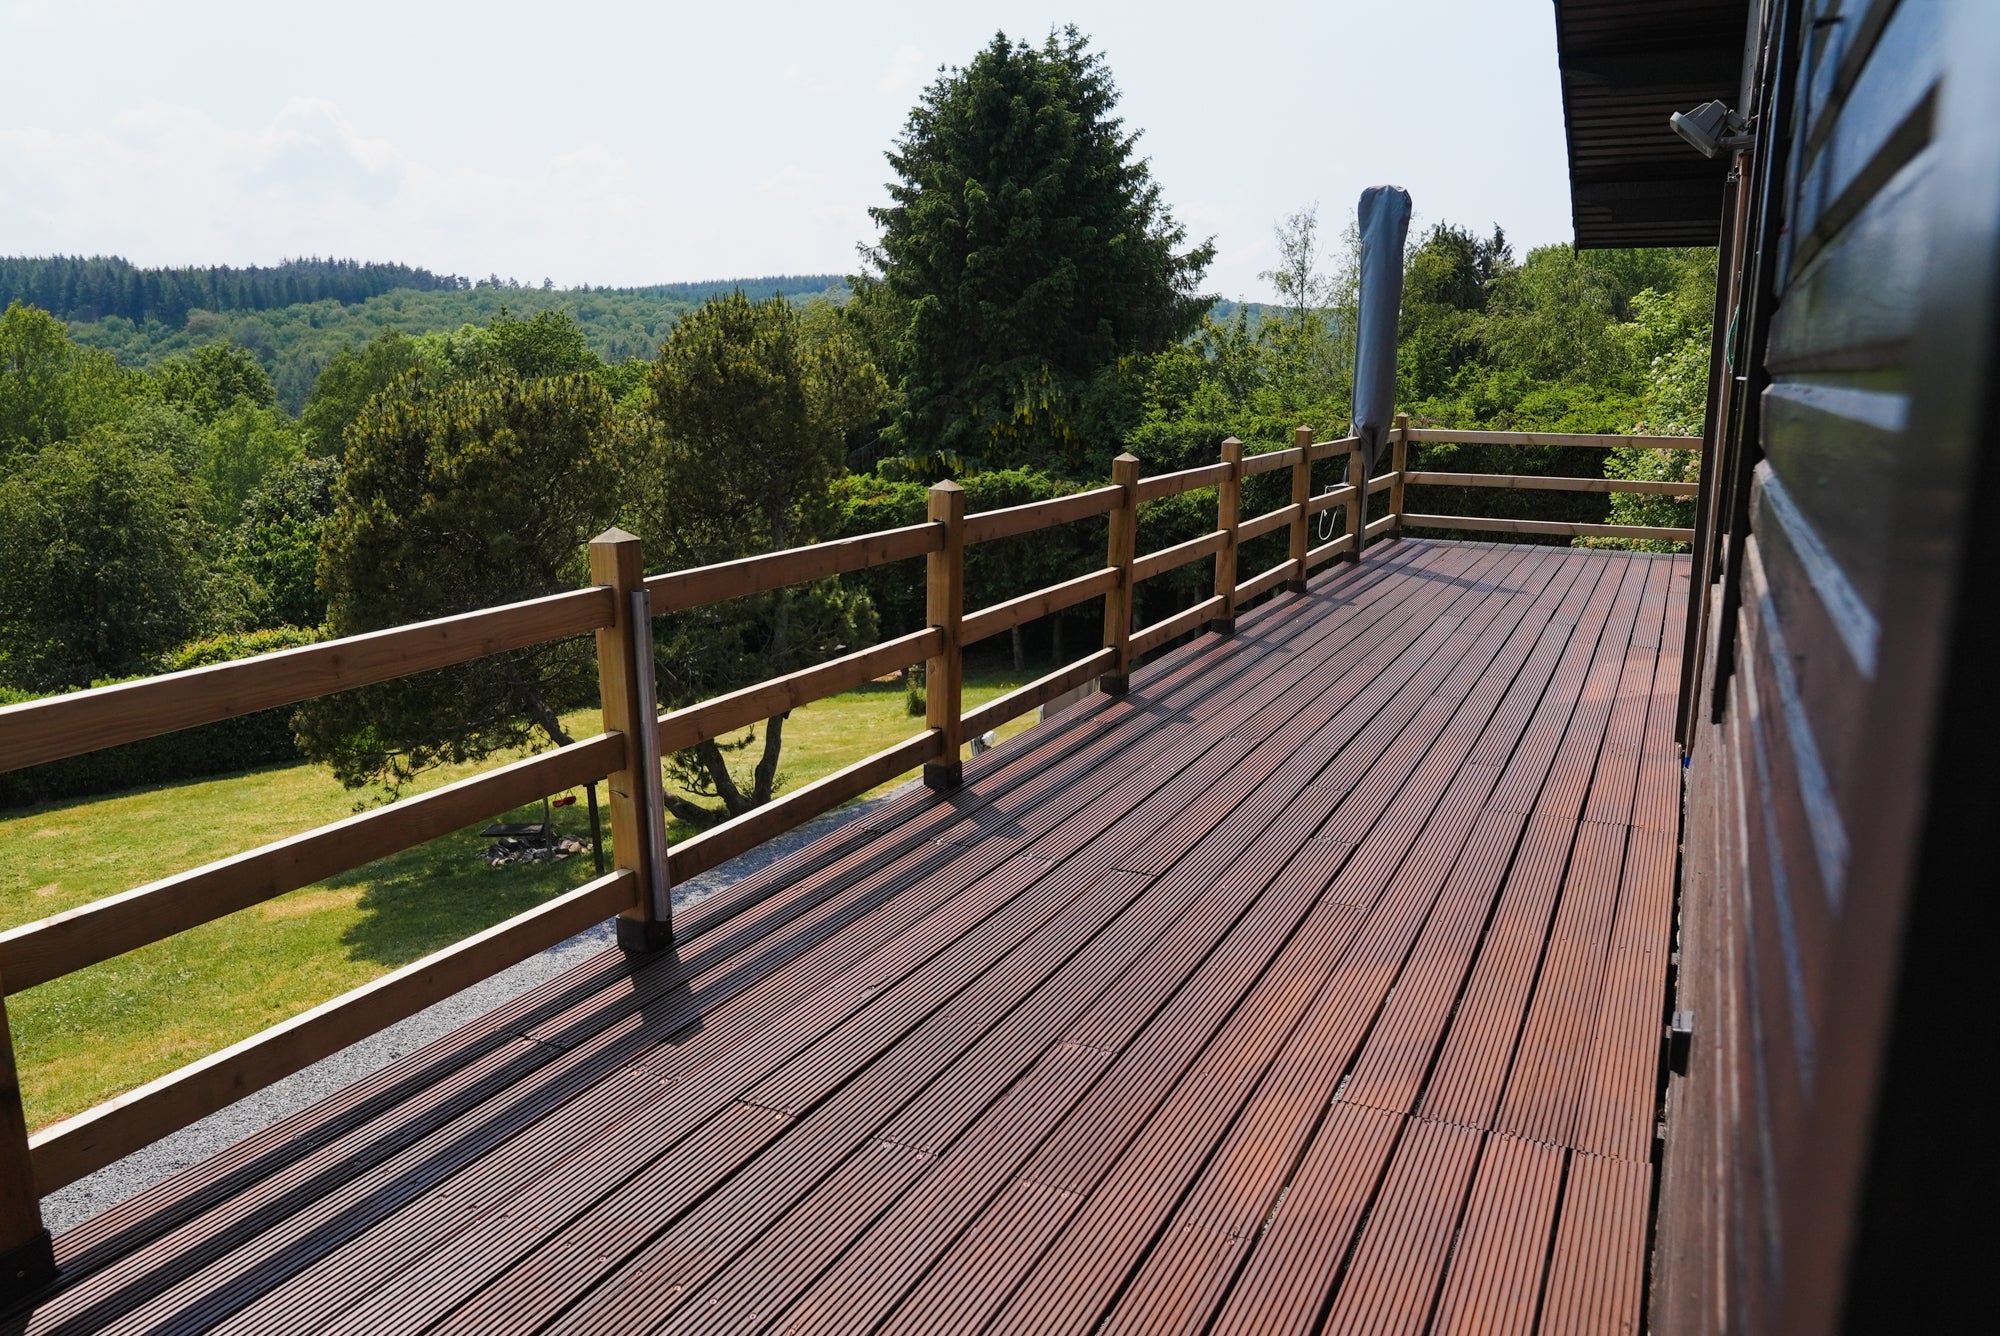 DuroGrit was used to color and protect and finish this wood deck in one single coat. It gave it tough mechanical resistance and strong UV protection in just one application!